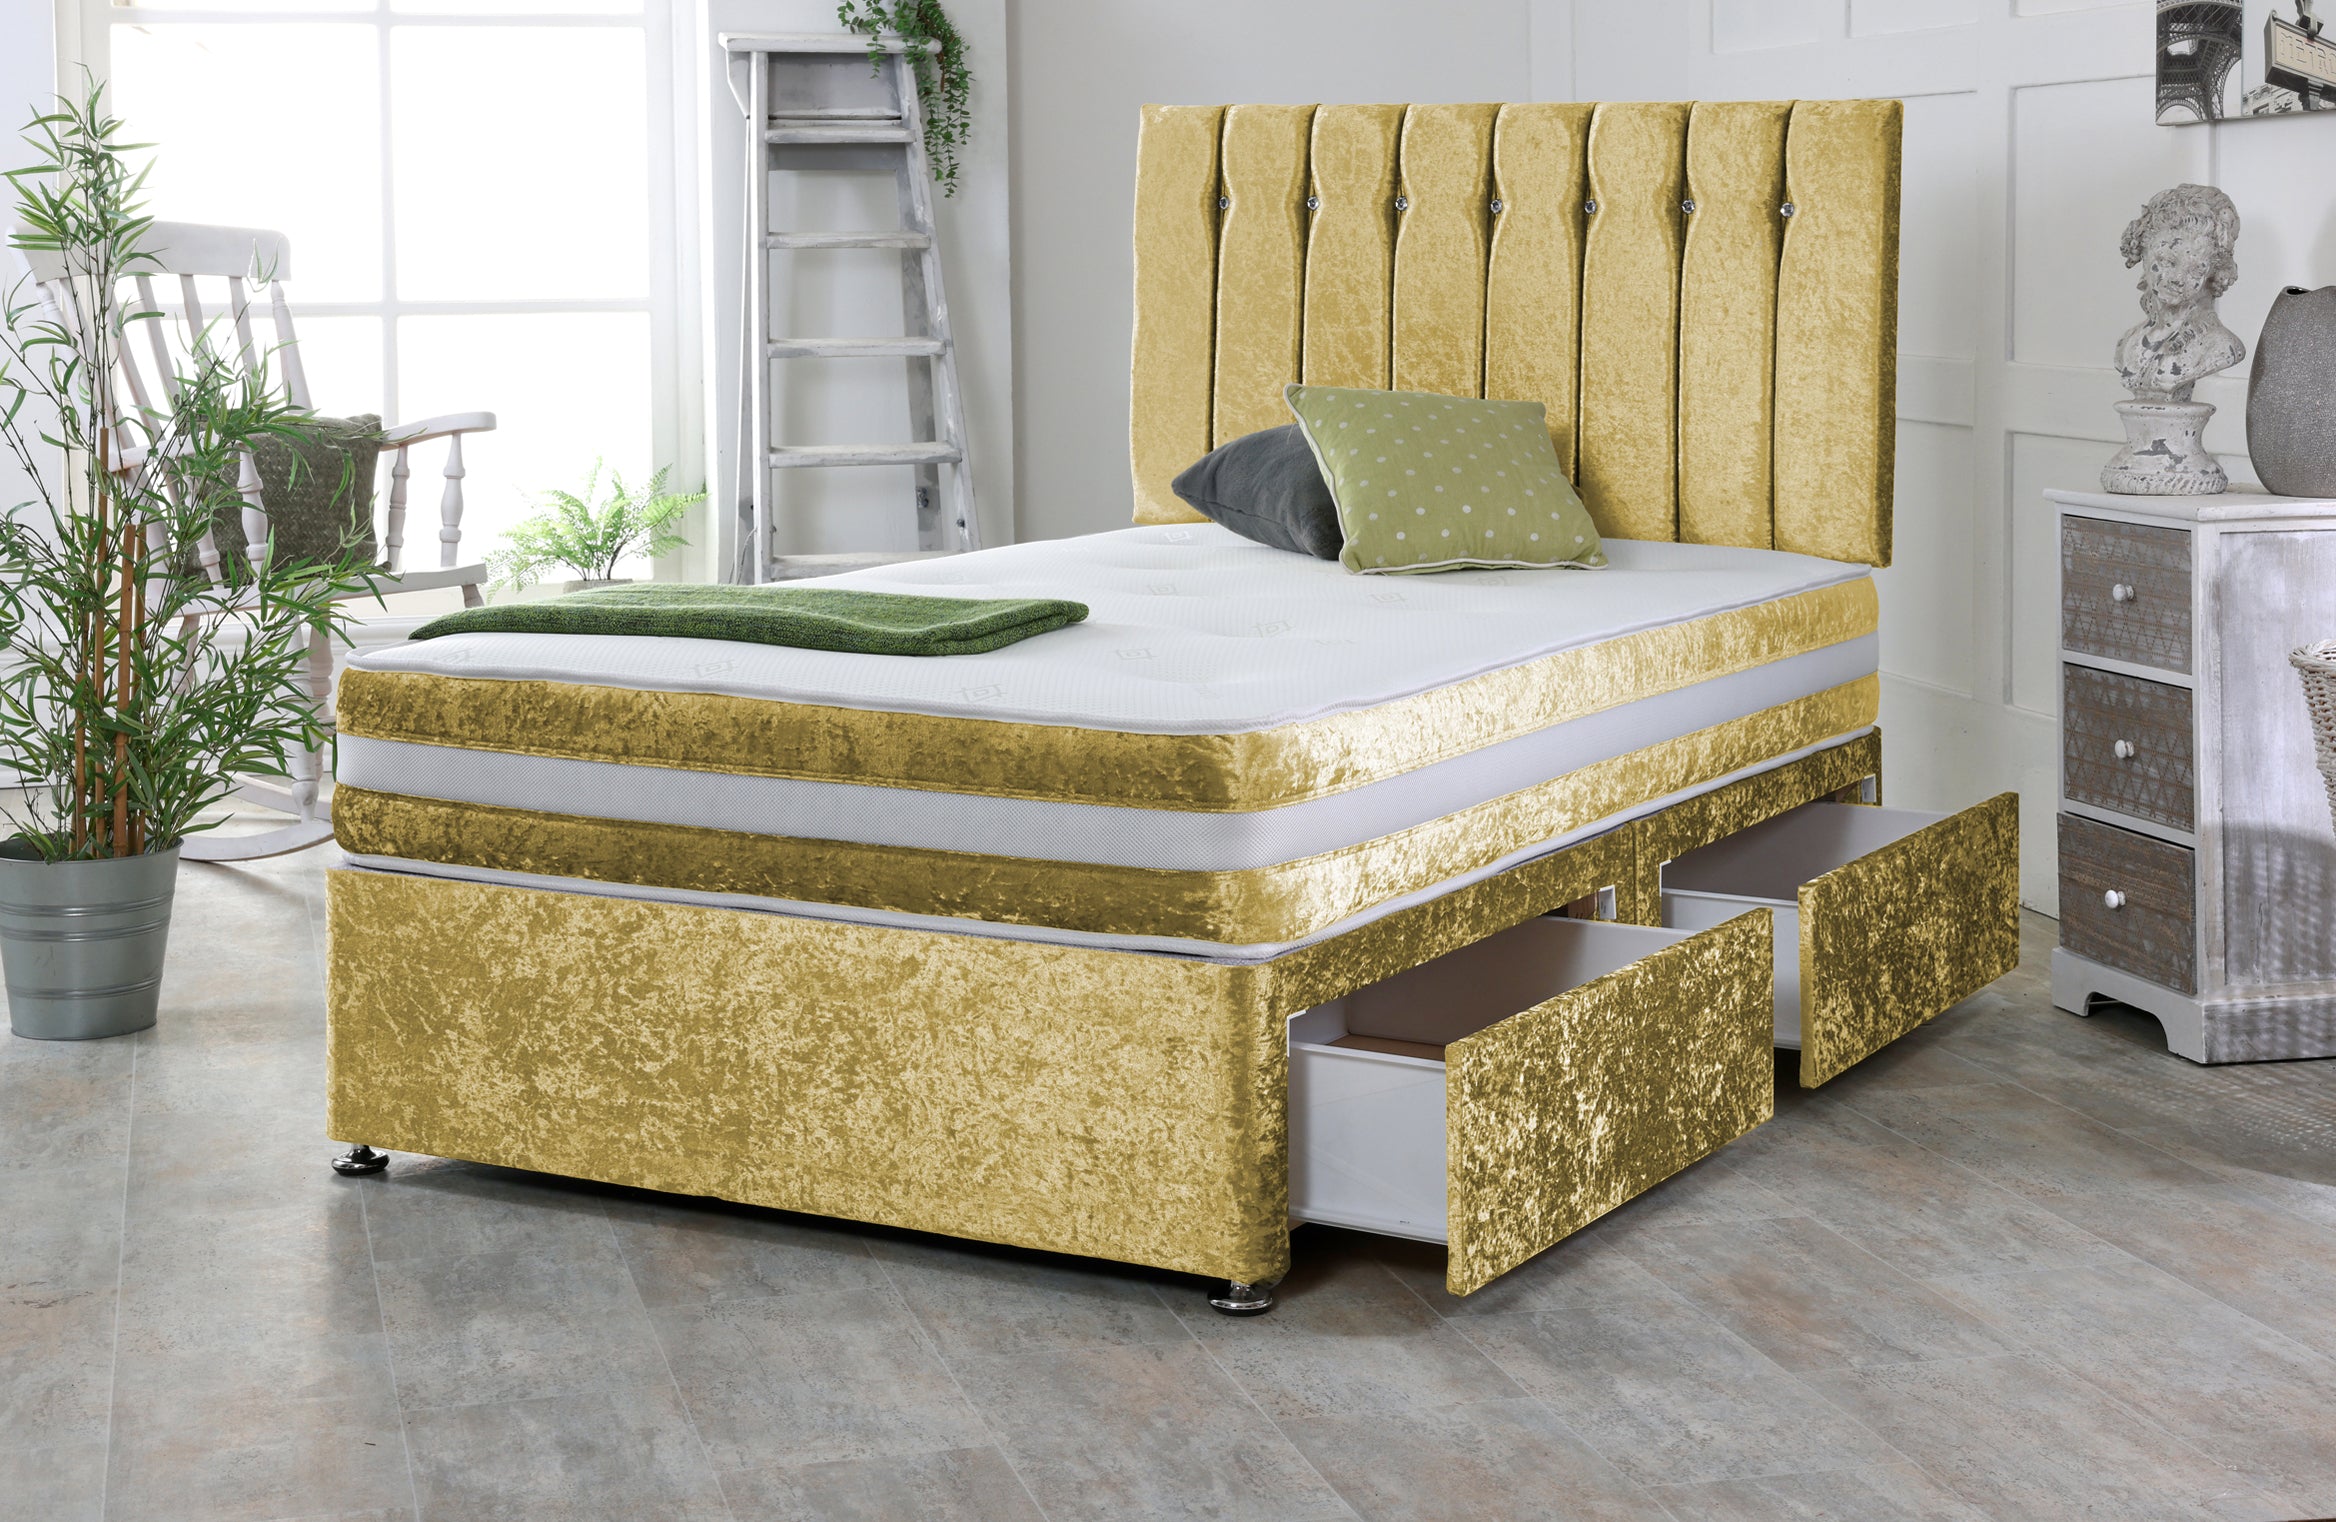 Delight Crushed Velvet Divan Bed Base Set with Mattress and Headboard